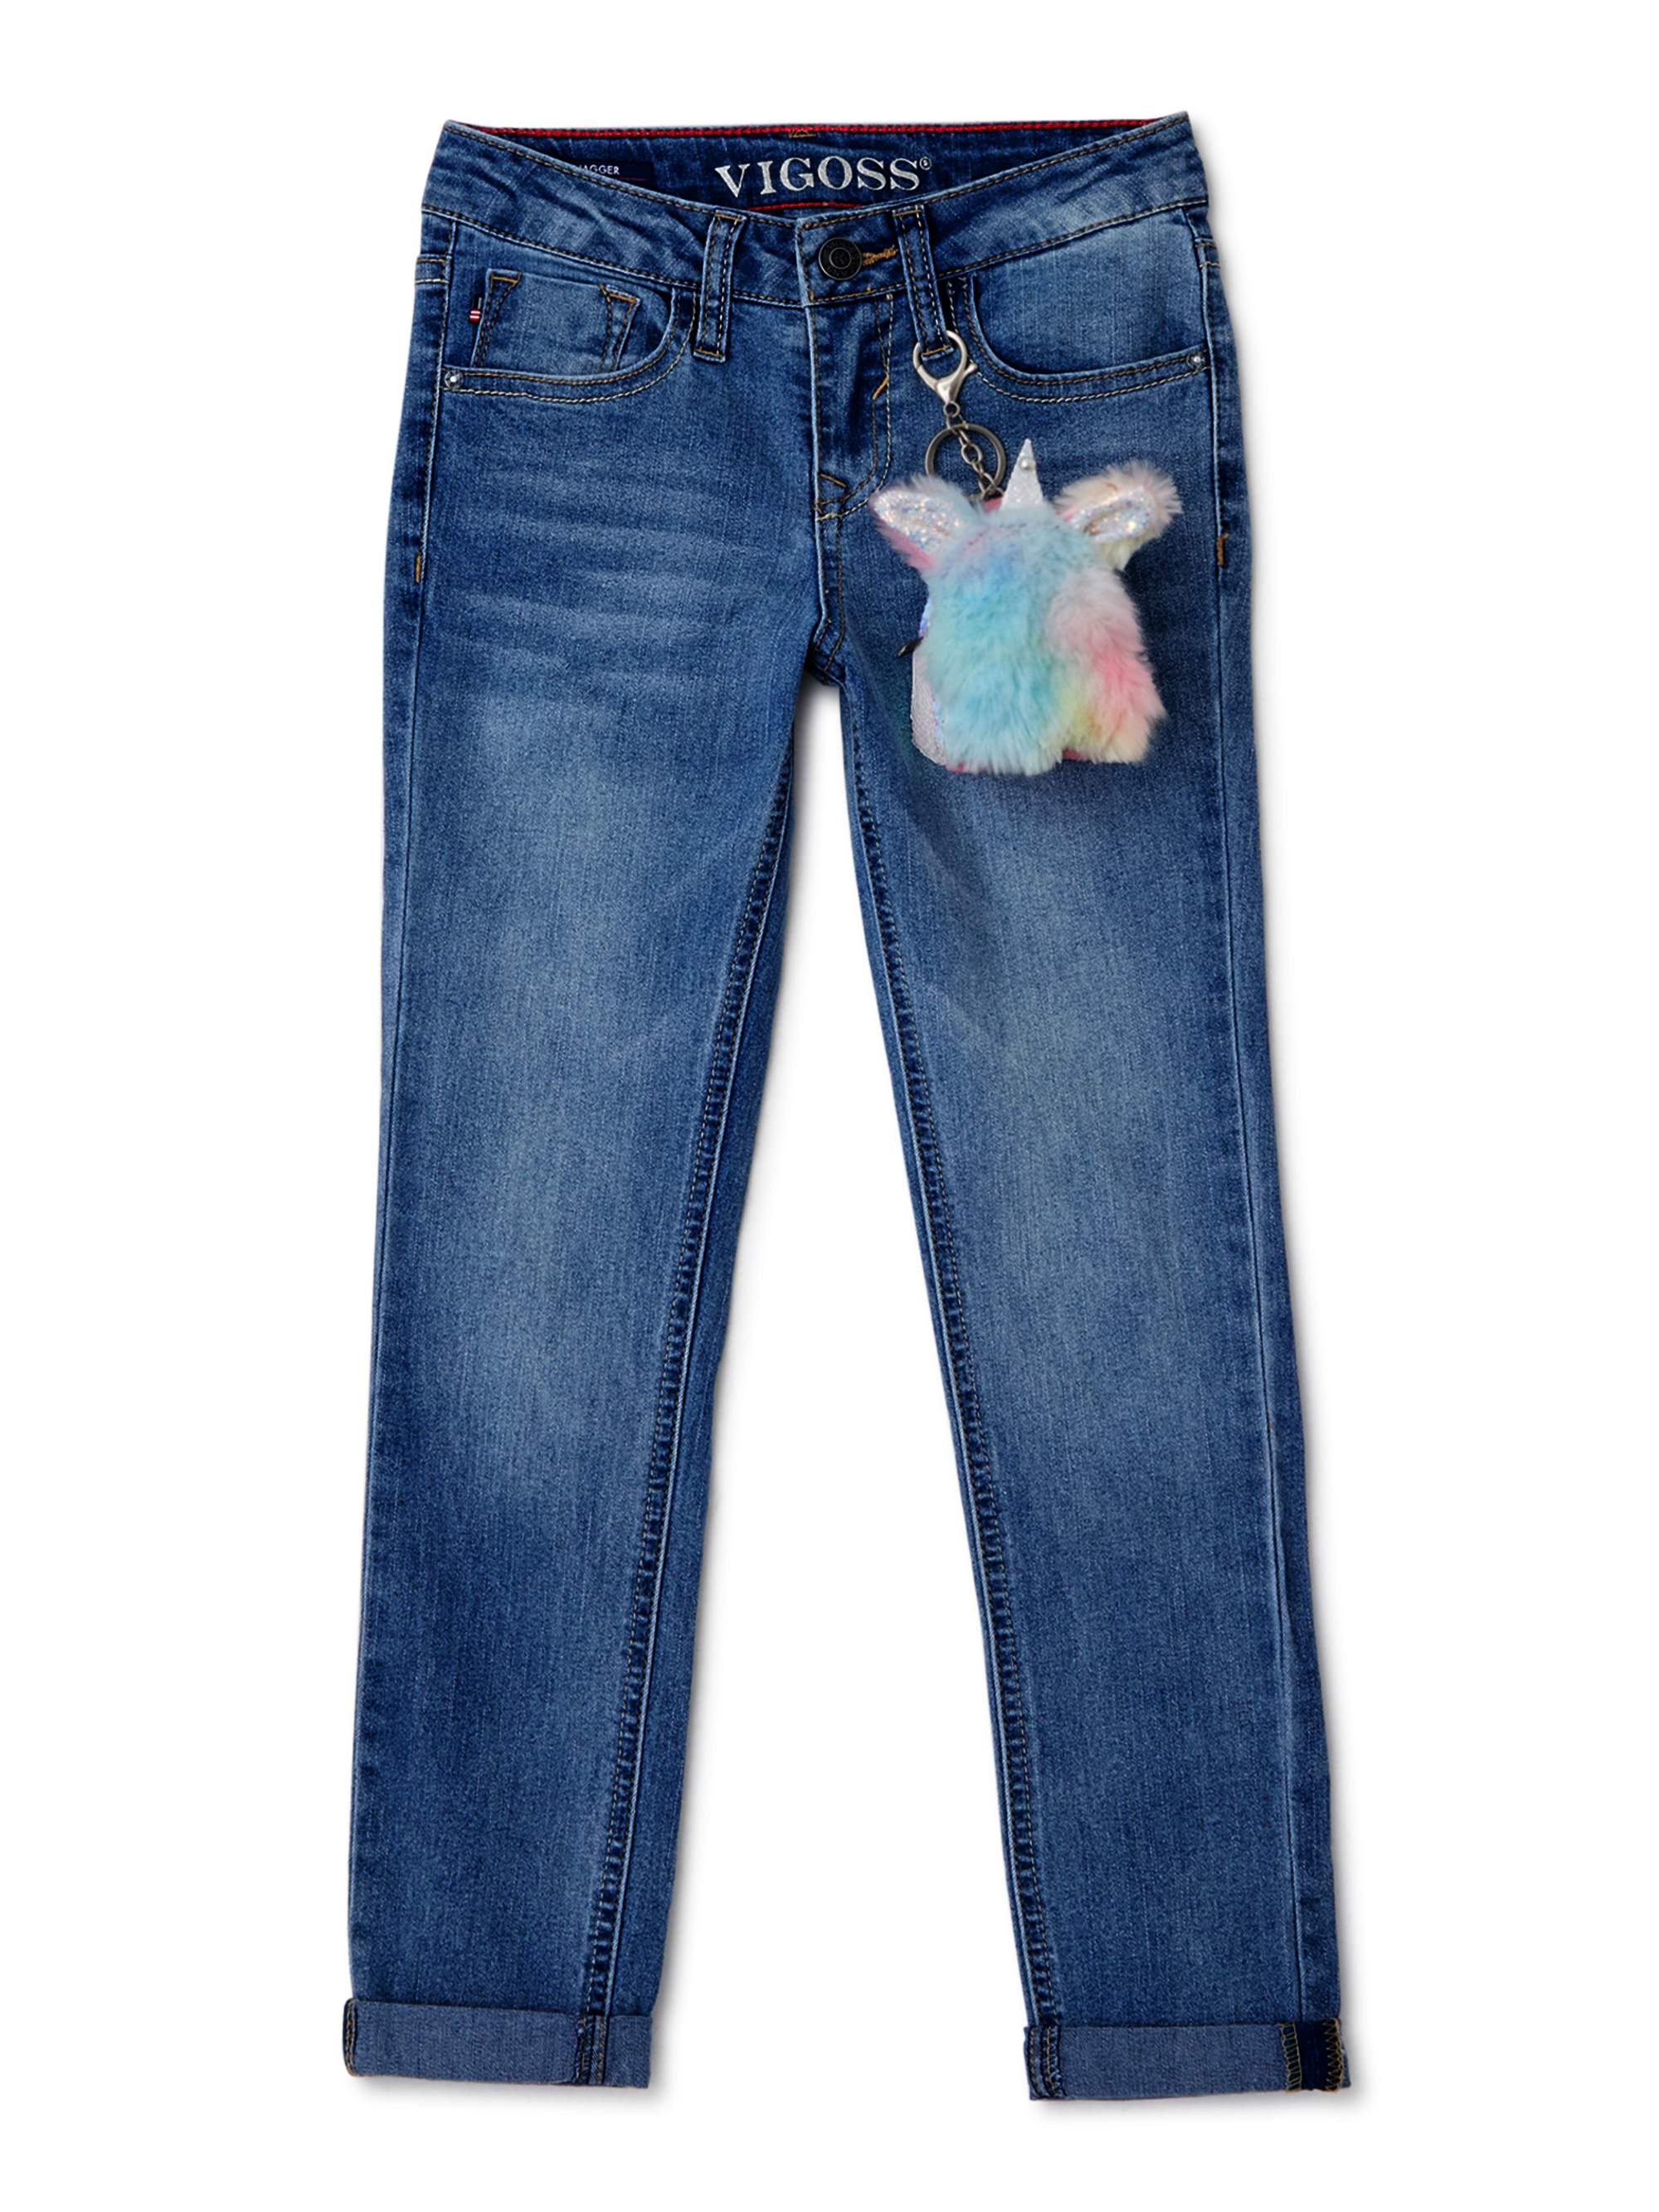 Vigoss Girls 24" Ankle Roll Cuff Skinny Jeans with Free Scrunchies, Sizes 7-14 - image 1 of 3